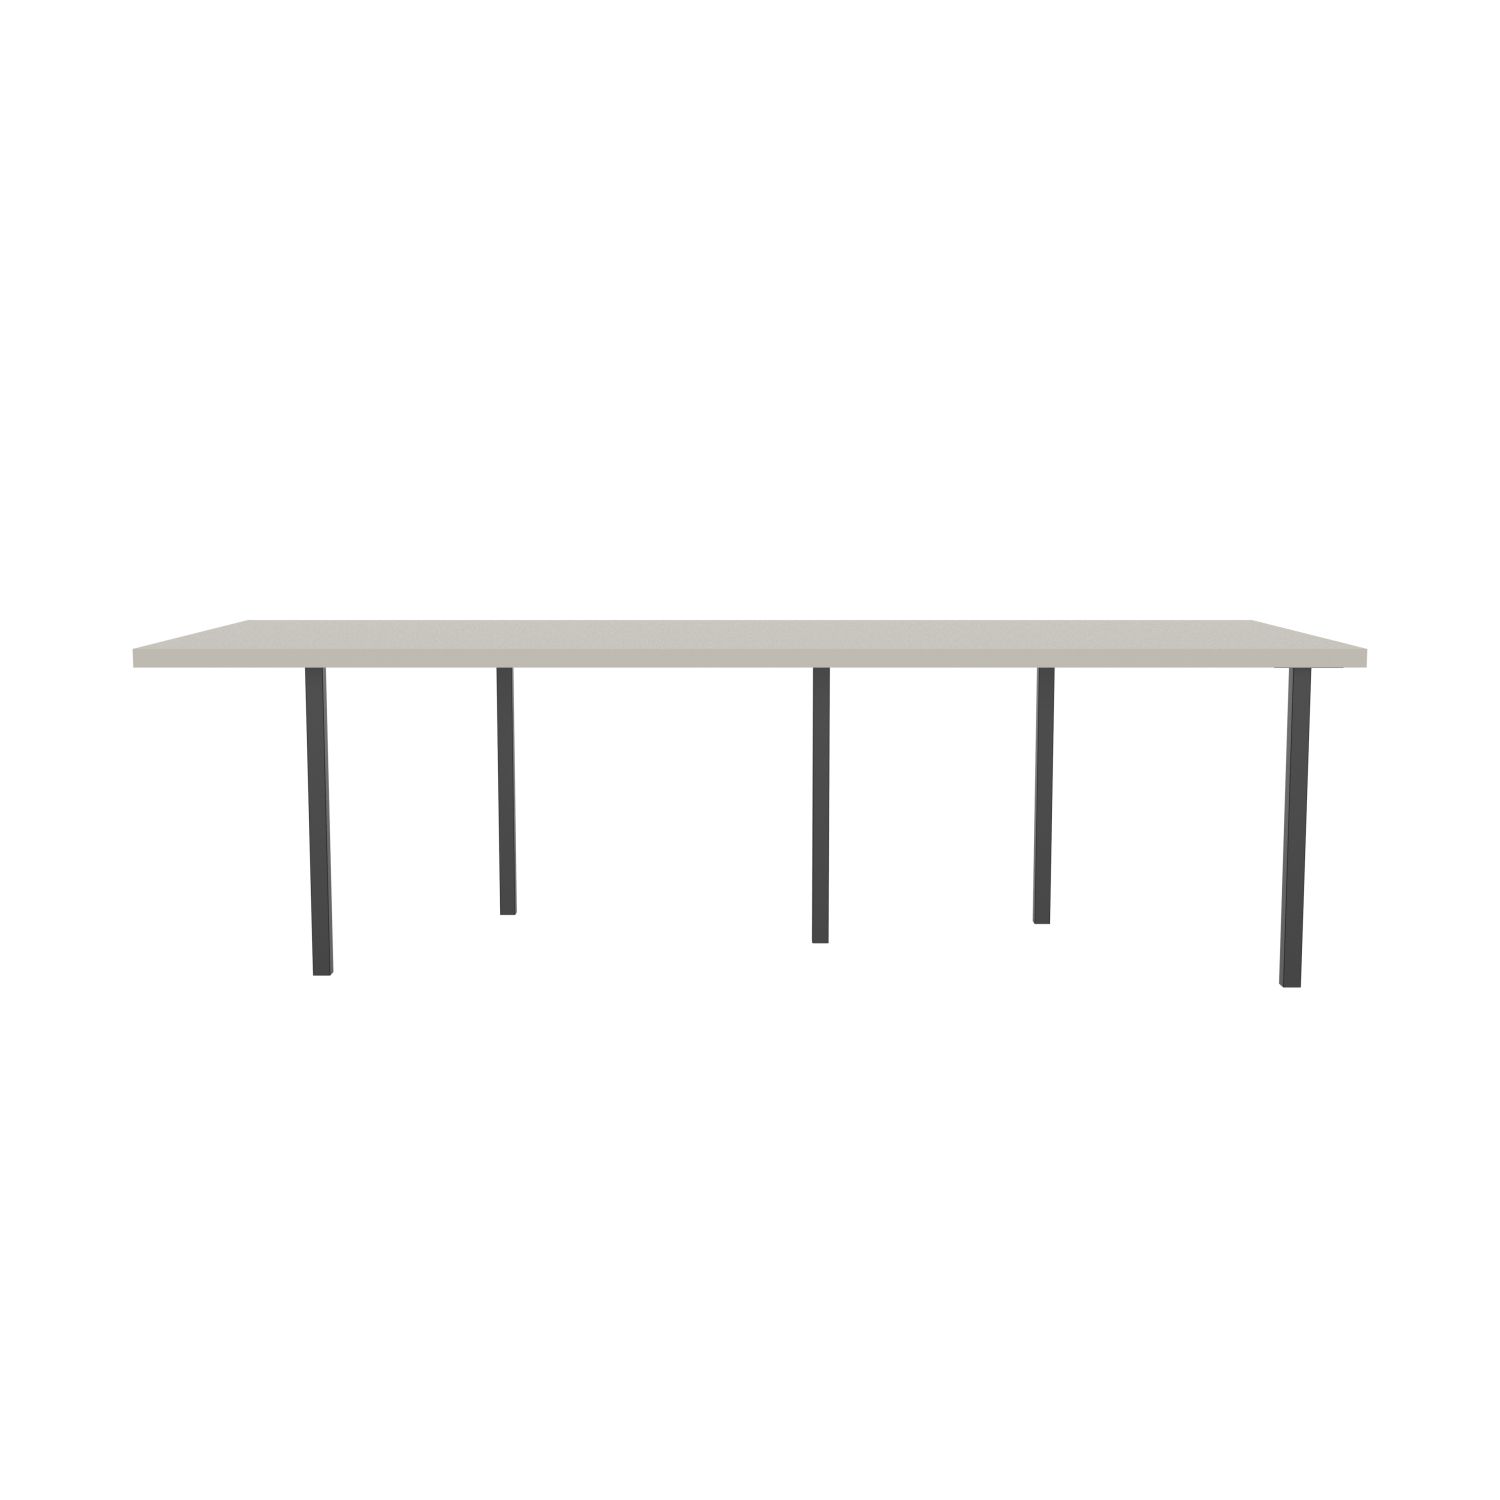 lensvelt bbrand table five fixed heigt 103x264 hpl white 50 mm price level 1 black ral9005